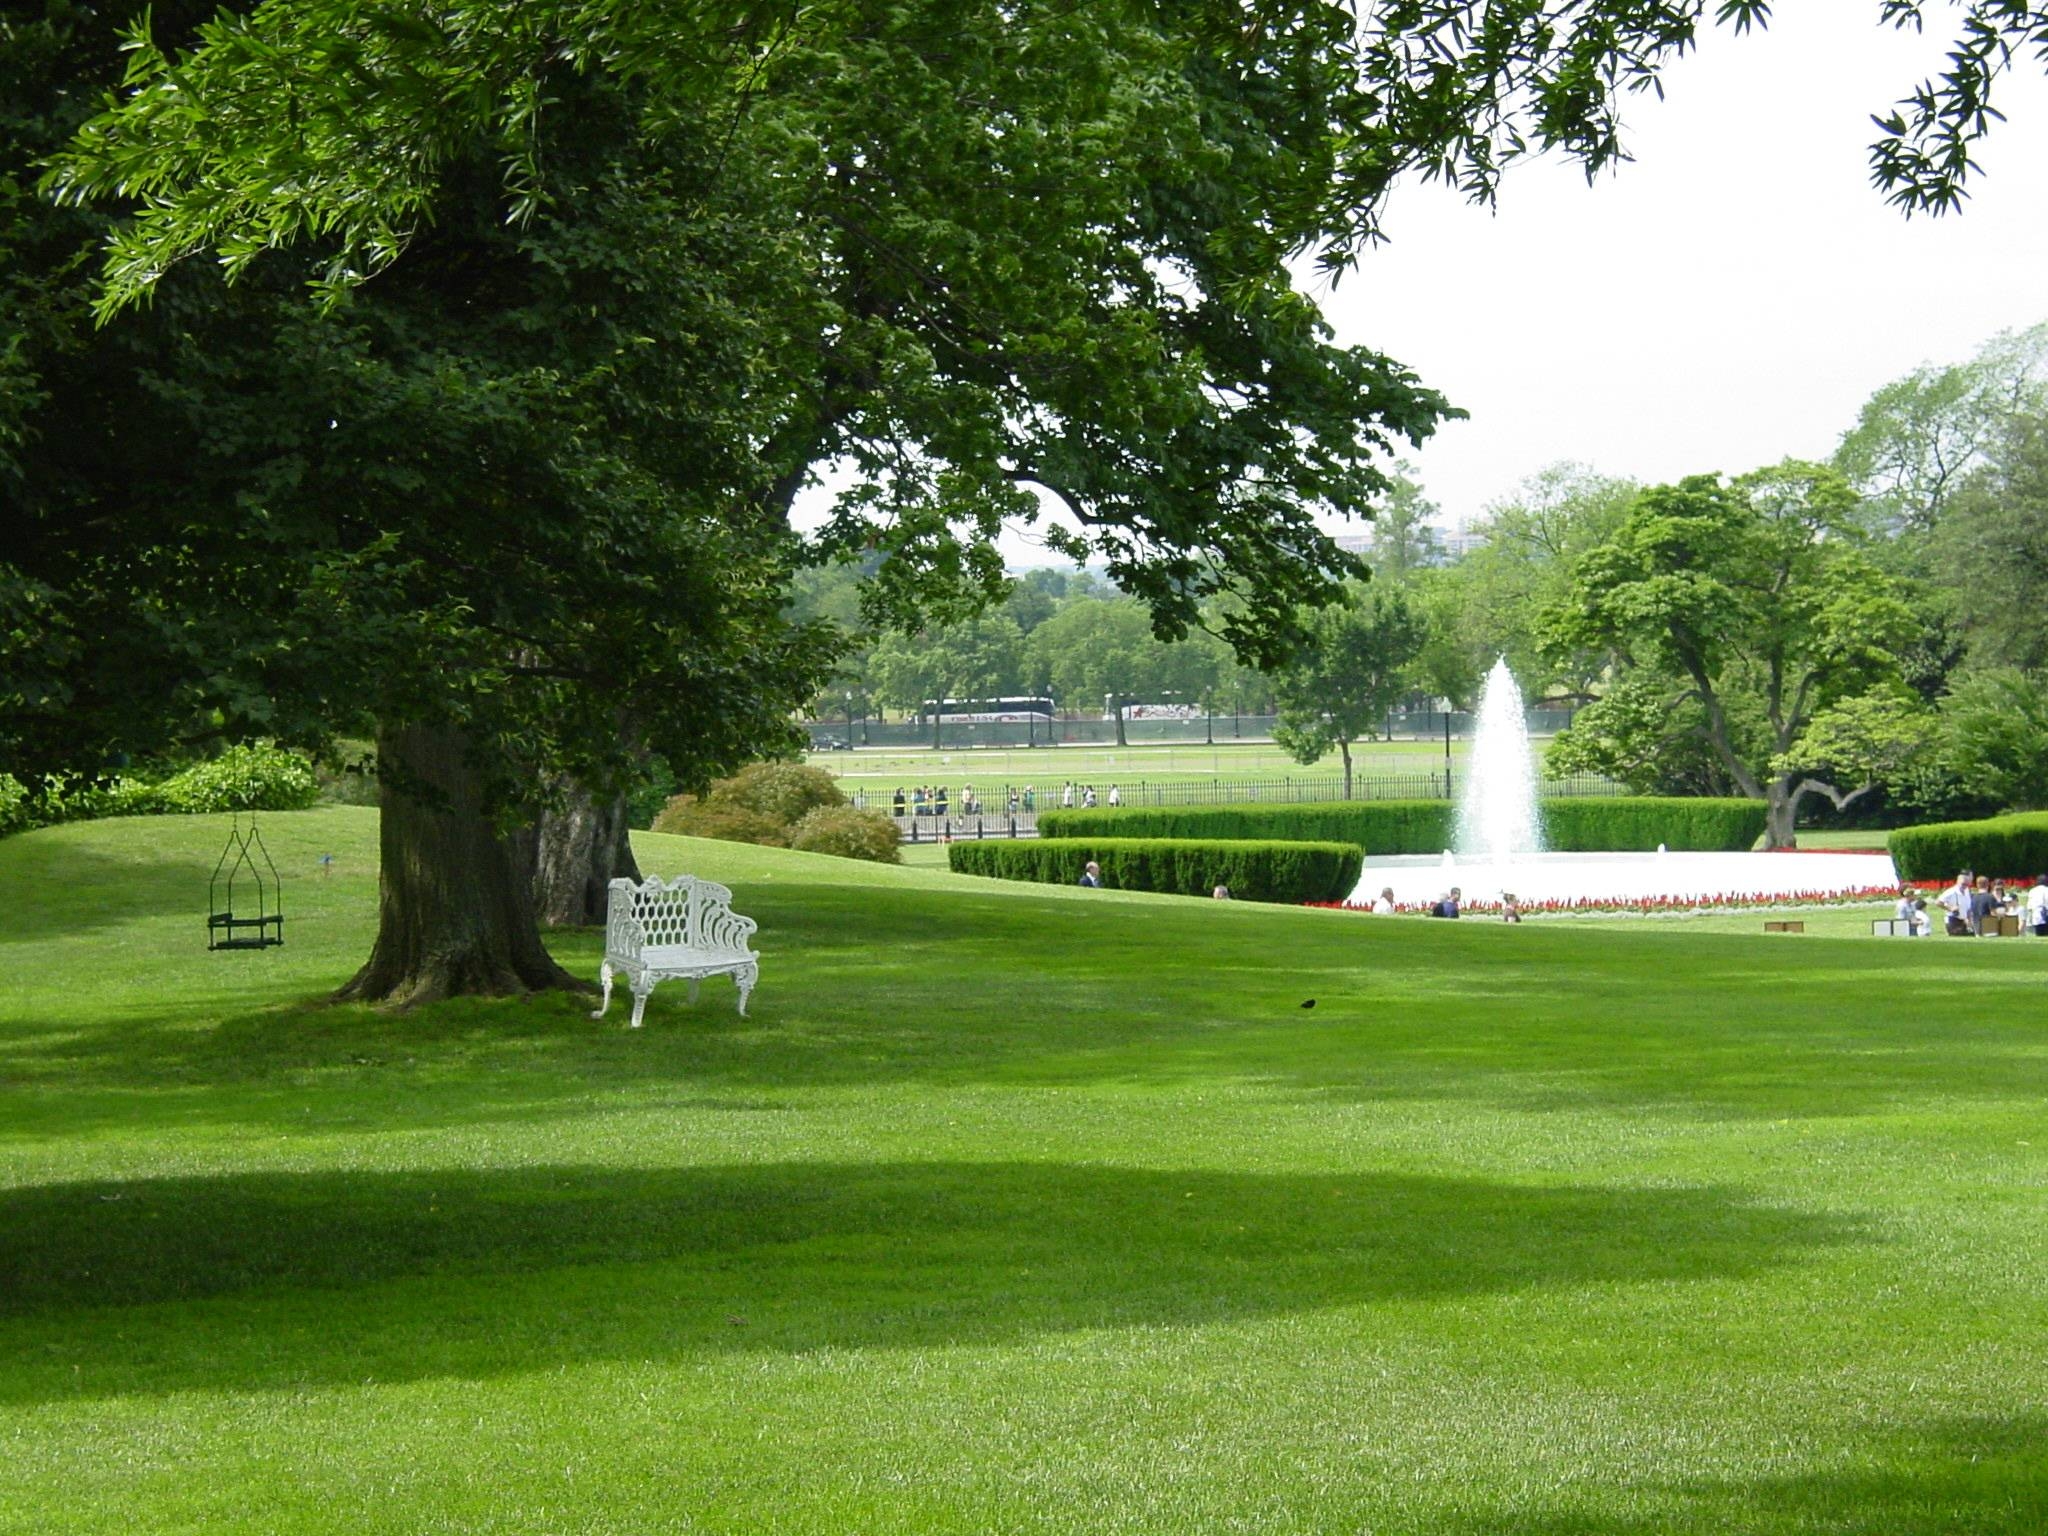 Green lawn dotted with shady trees. In the distance, a fountain